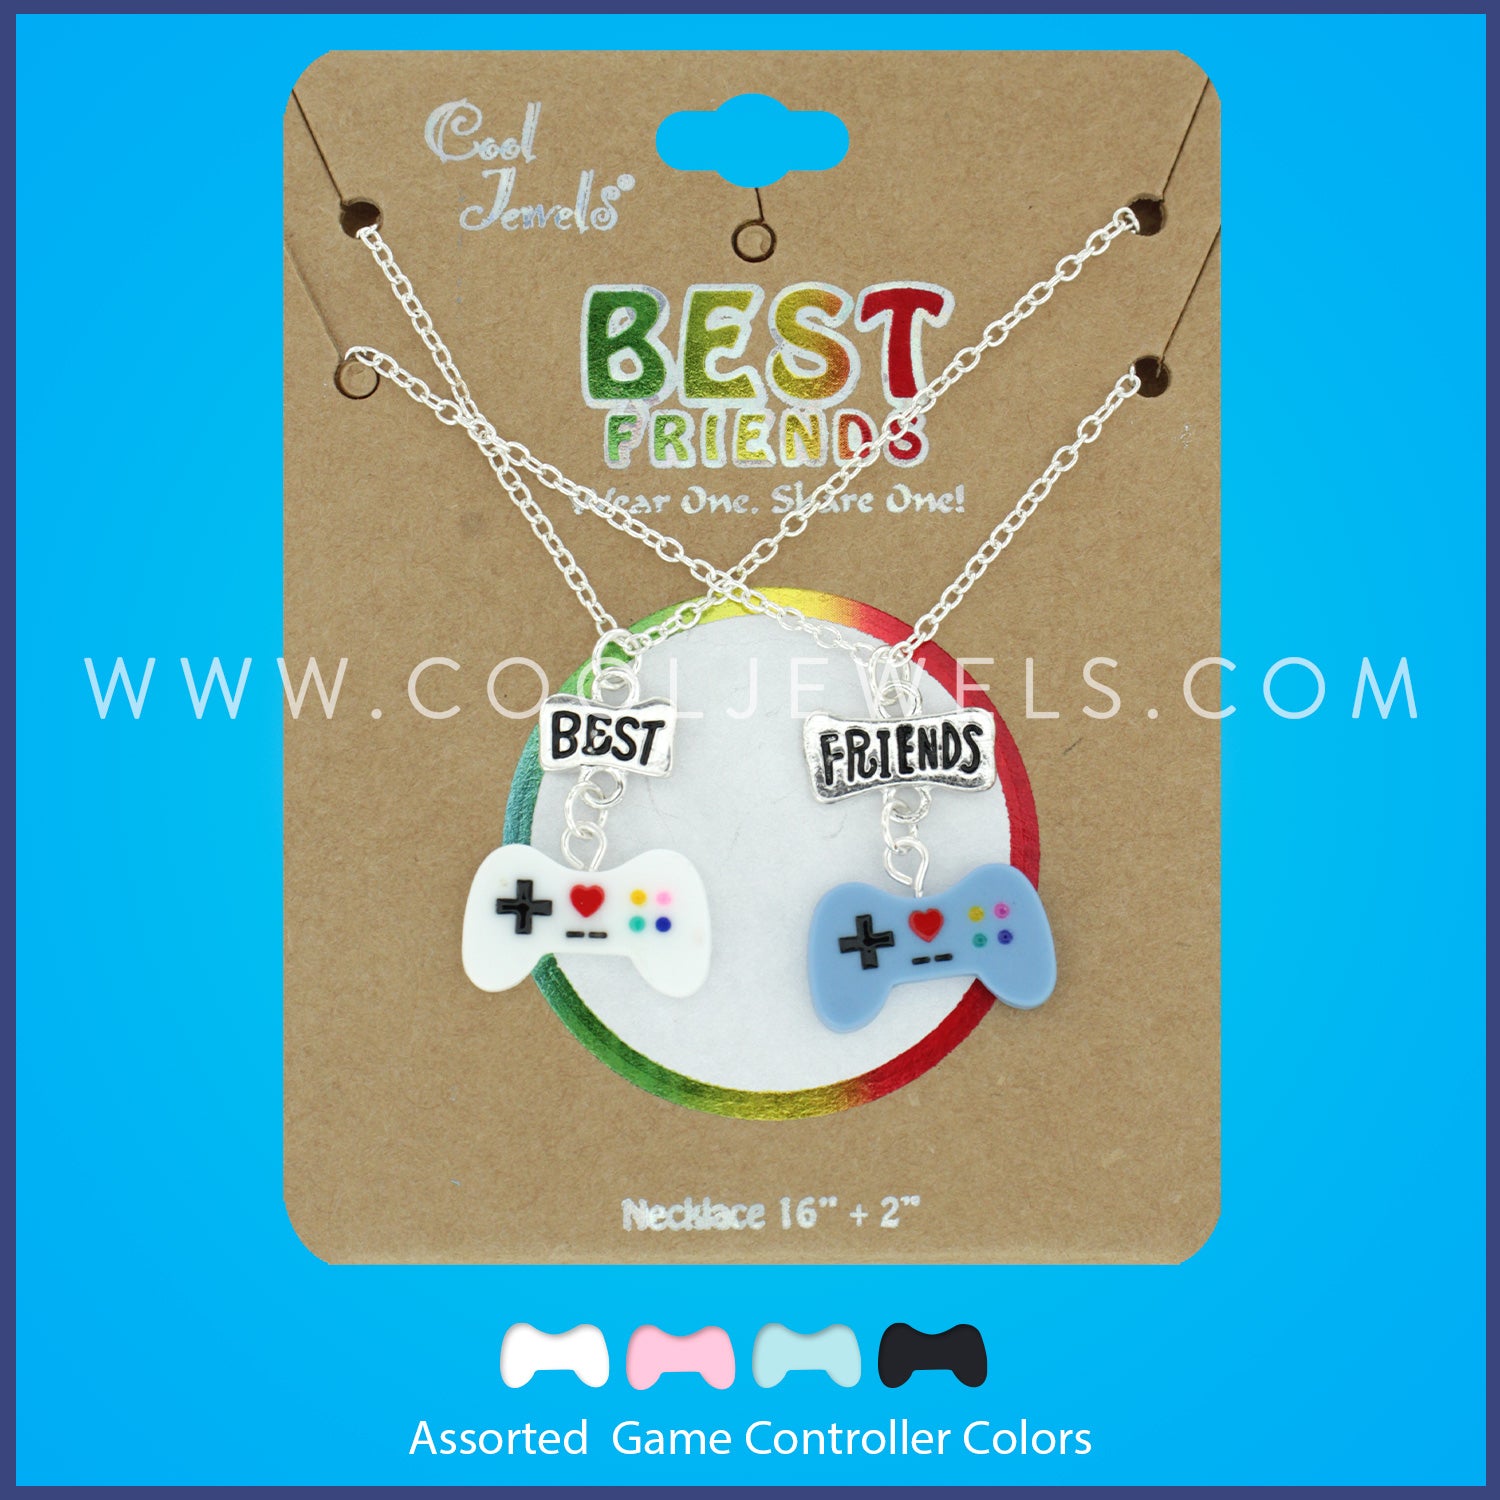 (SET OF 2) SILVER CHAIN NECKLACE WITH BEST FRIENDS GAME CONTROLLER PENDANTS - CARDED